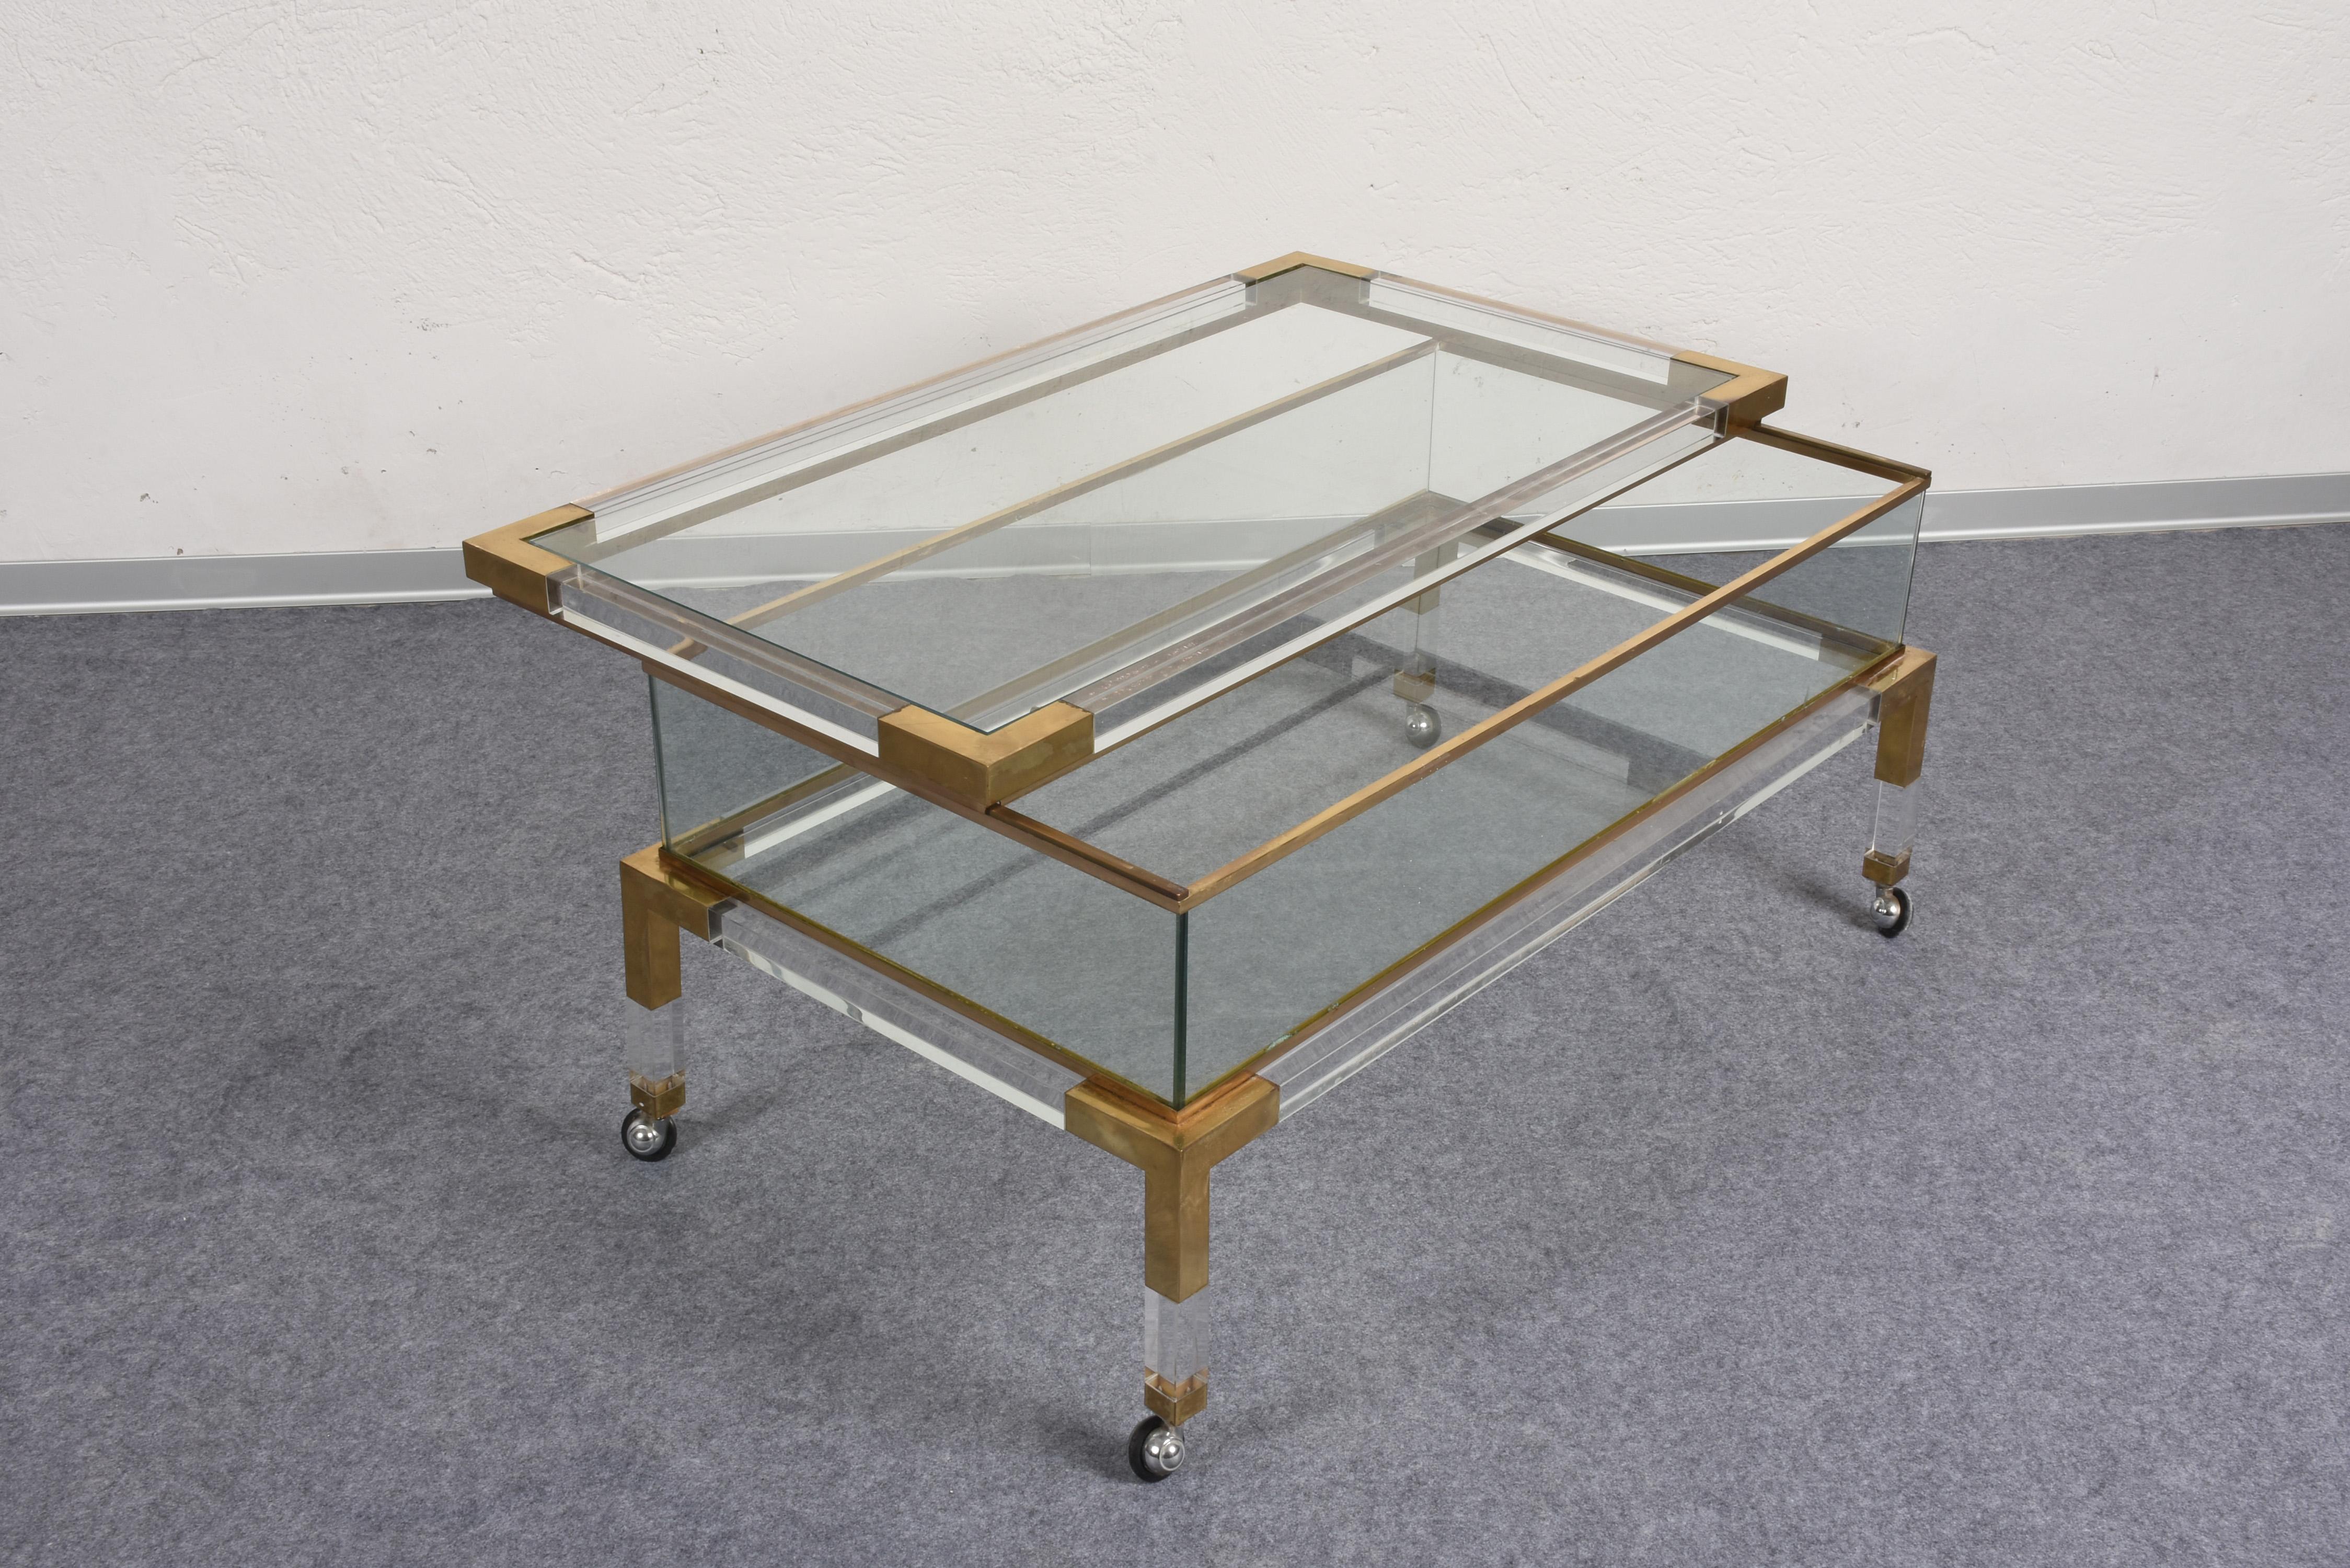 Beautiful coffee table by Maison Jansen in brass and Lucite with two glass tops from the 1970s. With wheels (removable)
The upper part can slide half open to reveal an interior compartment for books or decorations.
The dimensions are 39 x 21.25,